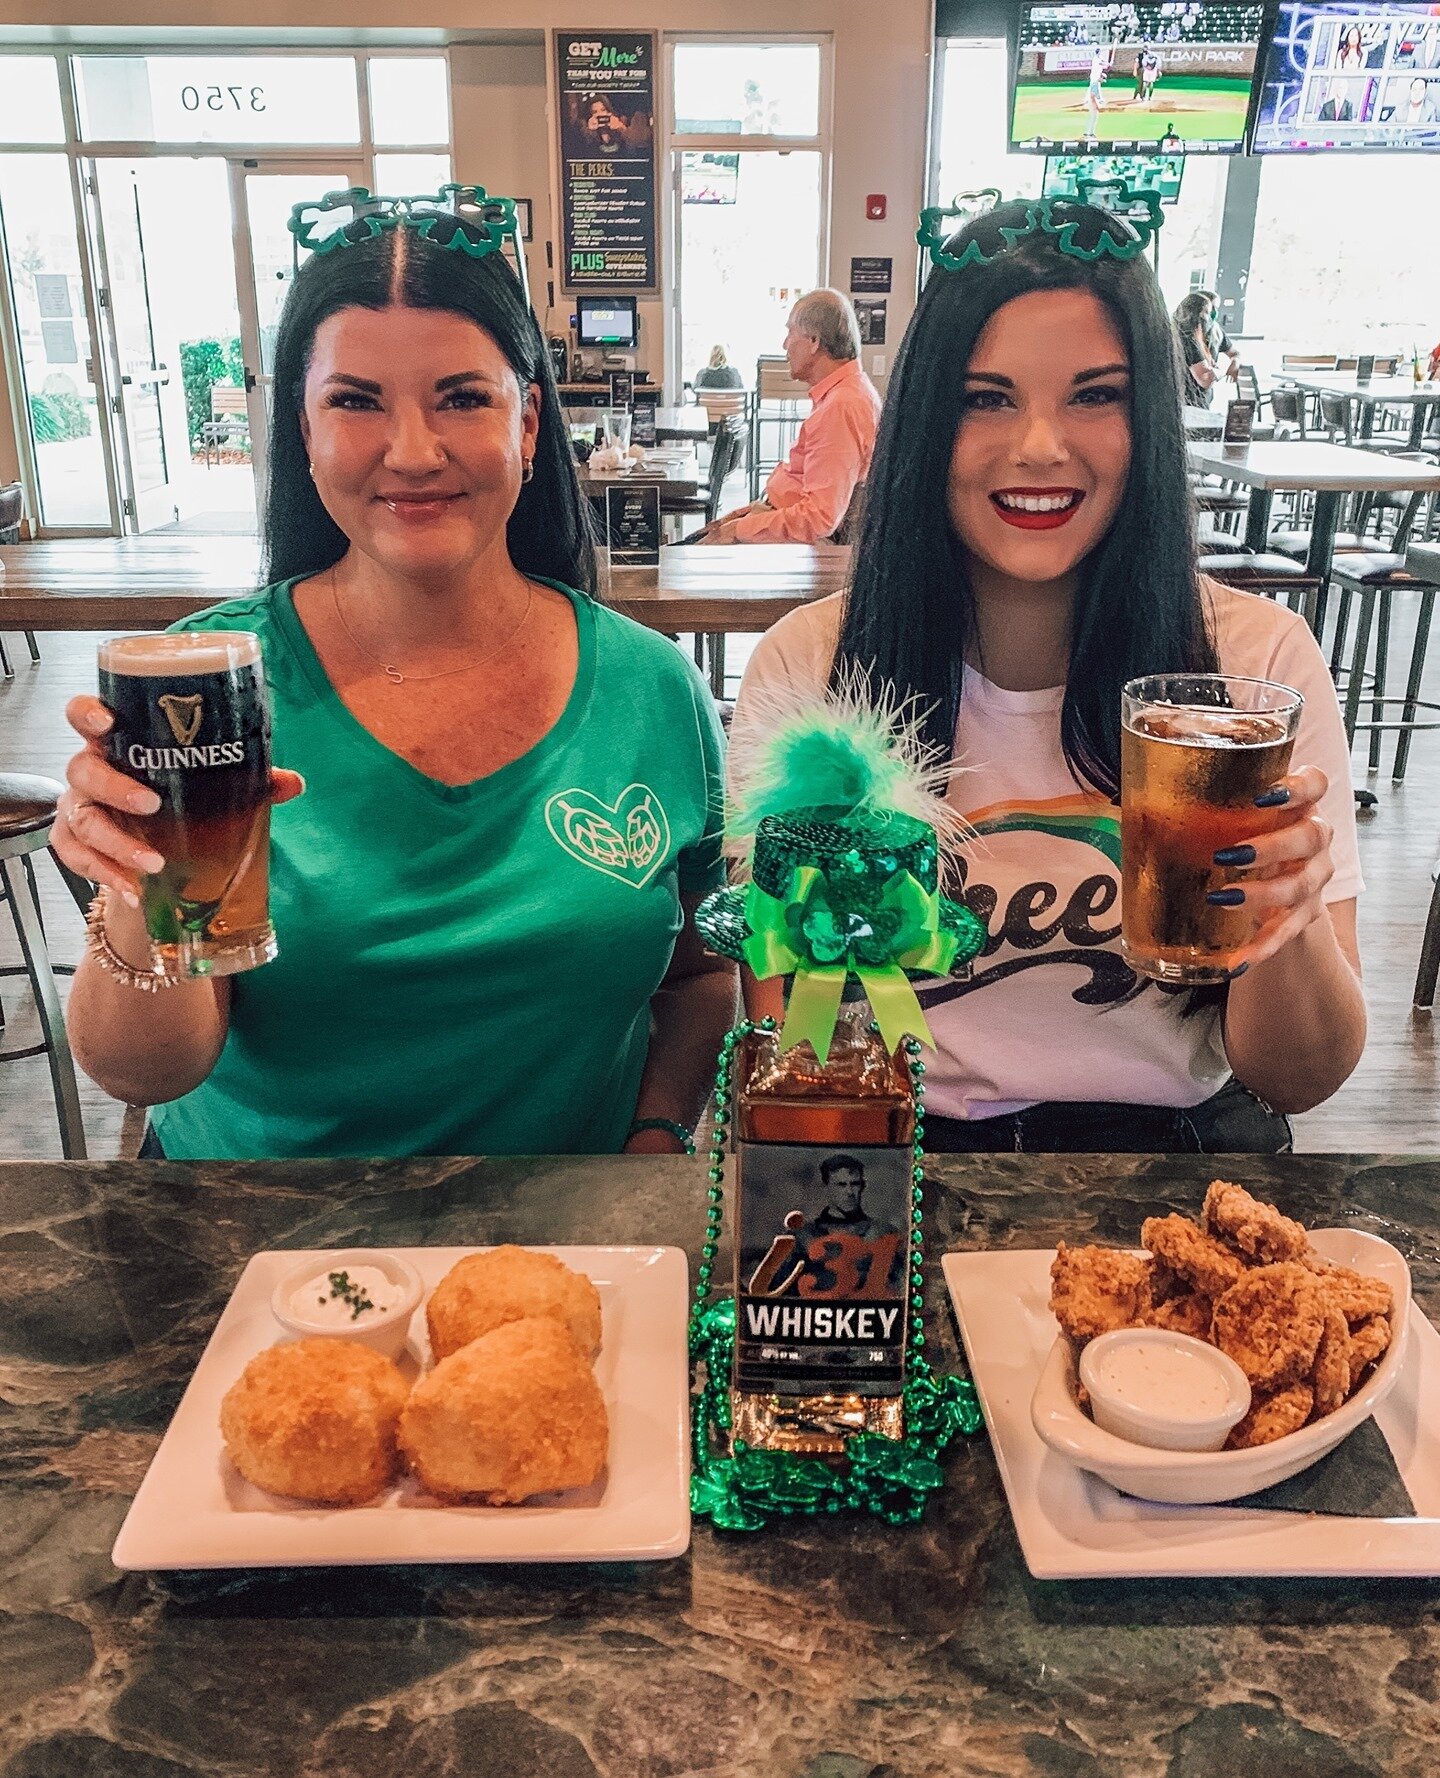 🎉🍀🎉🍻ST PADDY'S DAY GIVEAWAY🎉🍀🎉🍻⁠
.⁠
Top o&rsquo; the mornin&rsquo; Shenanigan-lovers!🍺 It&rsquo;s nearly St. Paddy&rsquo;s Day🍀, so we partnered with our friends at ⁠
@irish31pub to bring you a fun giveaway where one lucky leprechaun will w